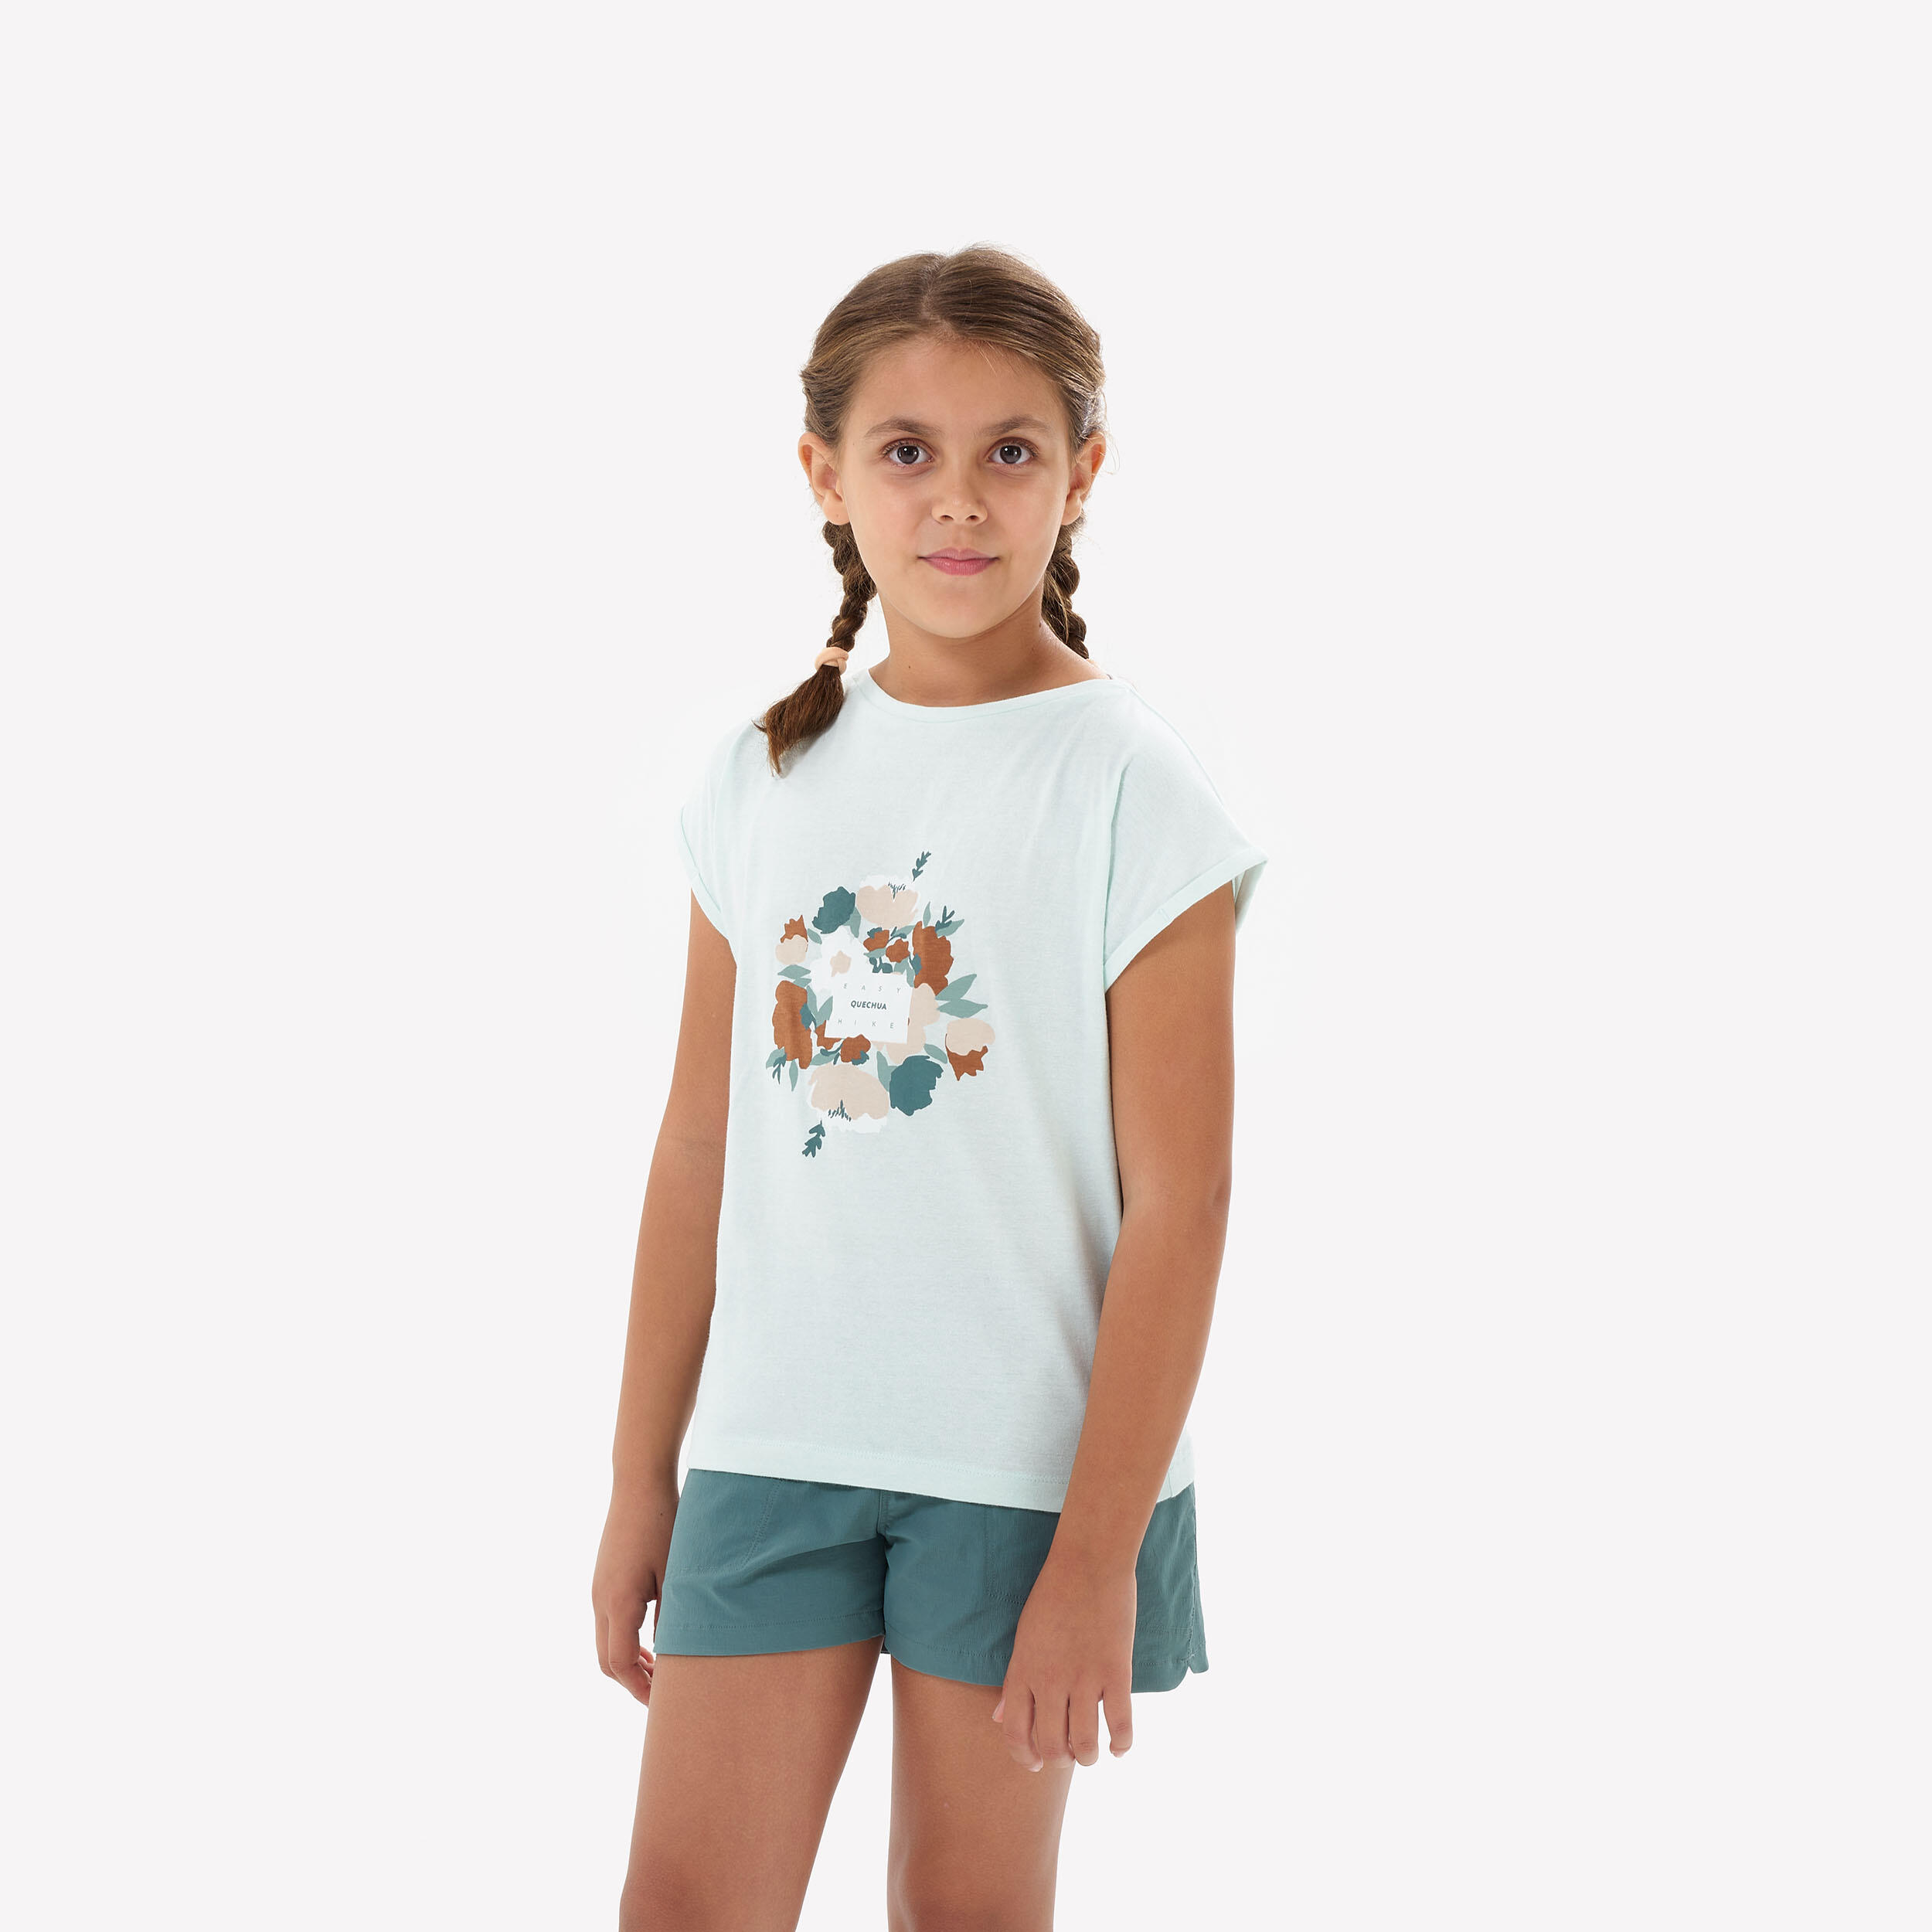 Girls’ Hiking T-Shirt - MH100 Ages 7-15 - Turquoise 1/6